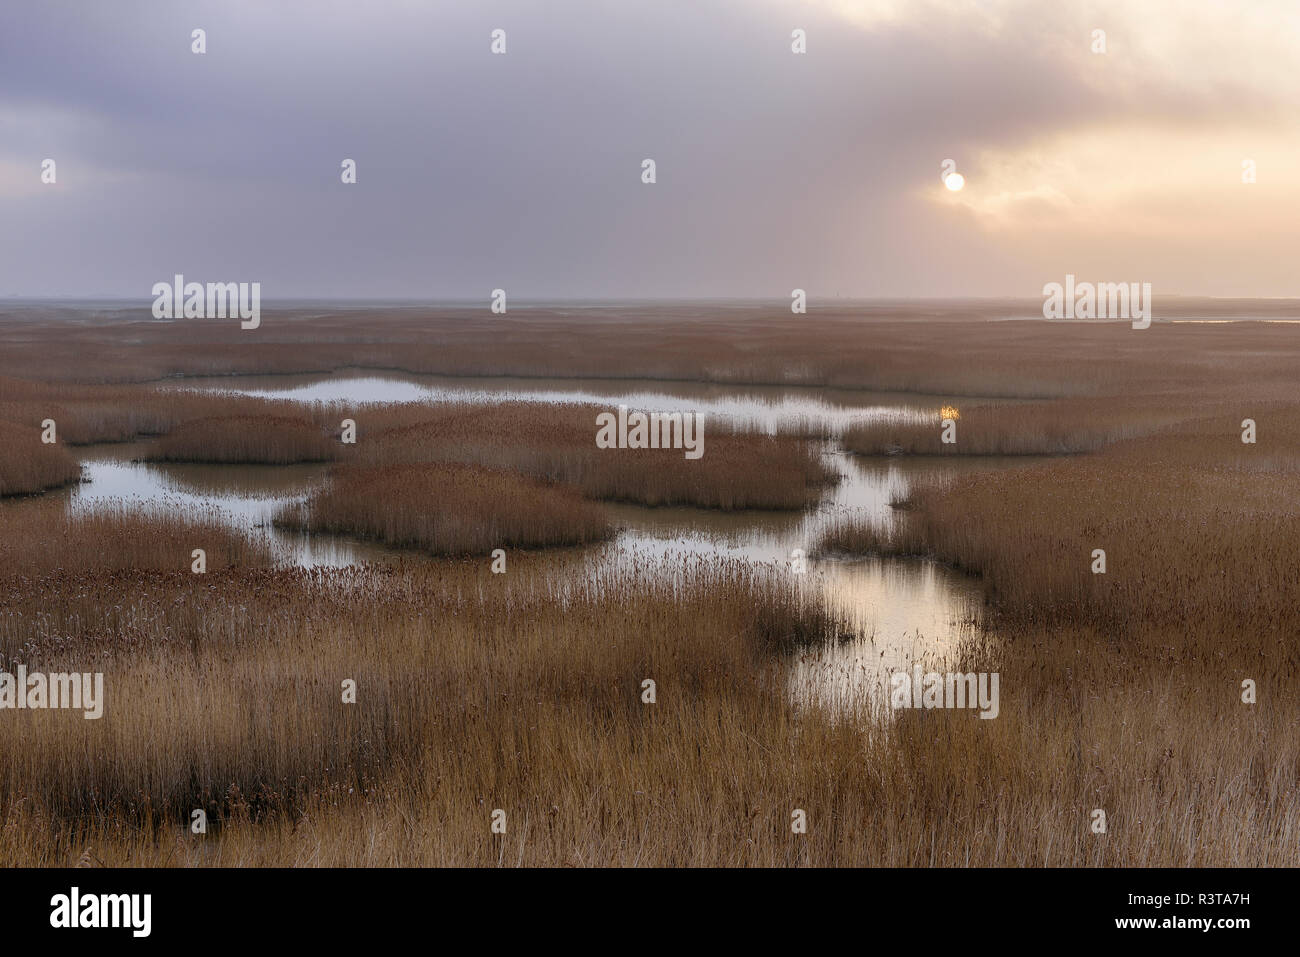 France, Le Havre, Seine River marsh with reed grass at sunrise Stock Photo